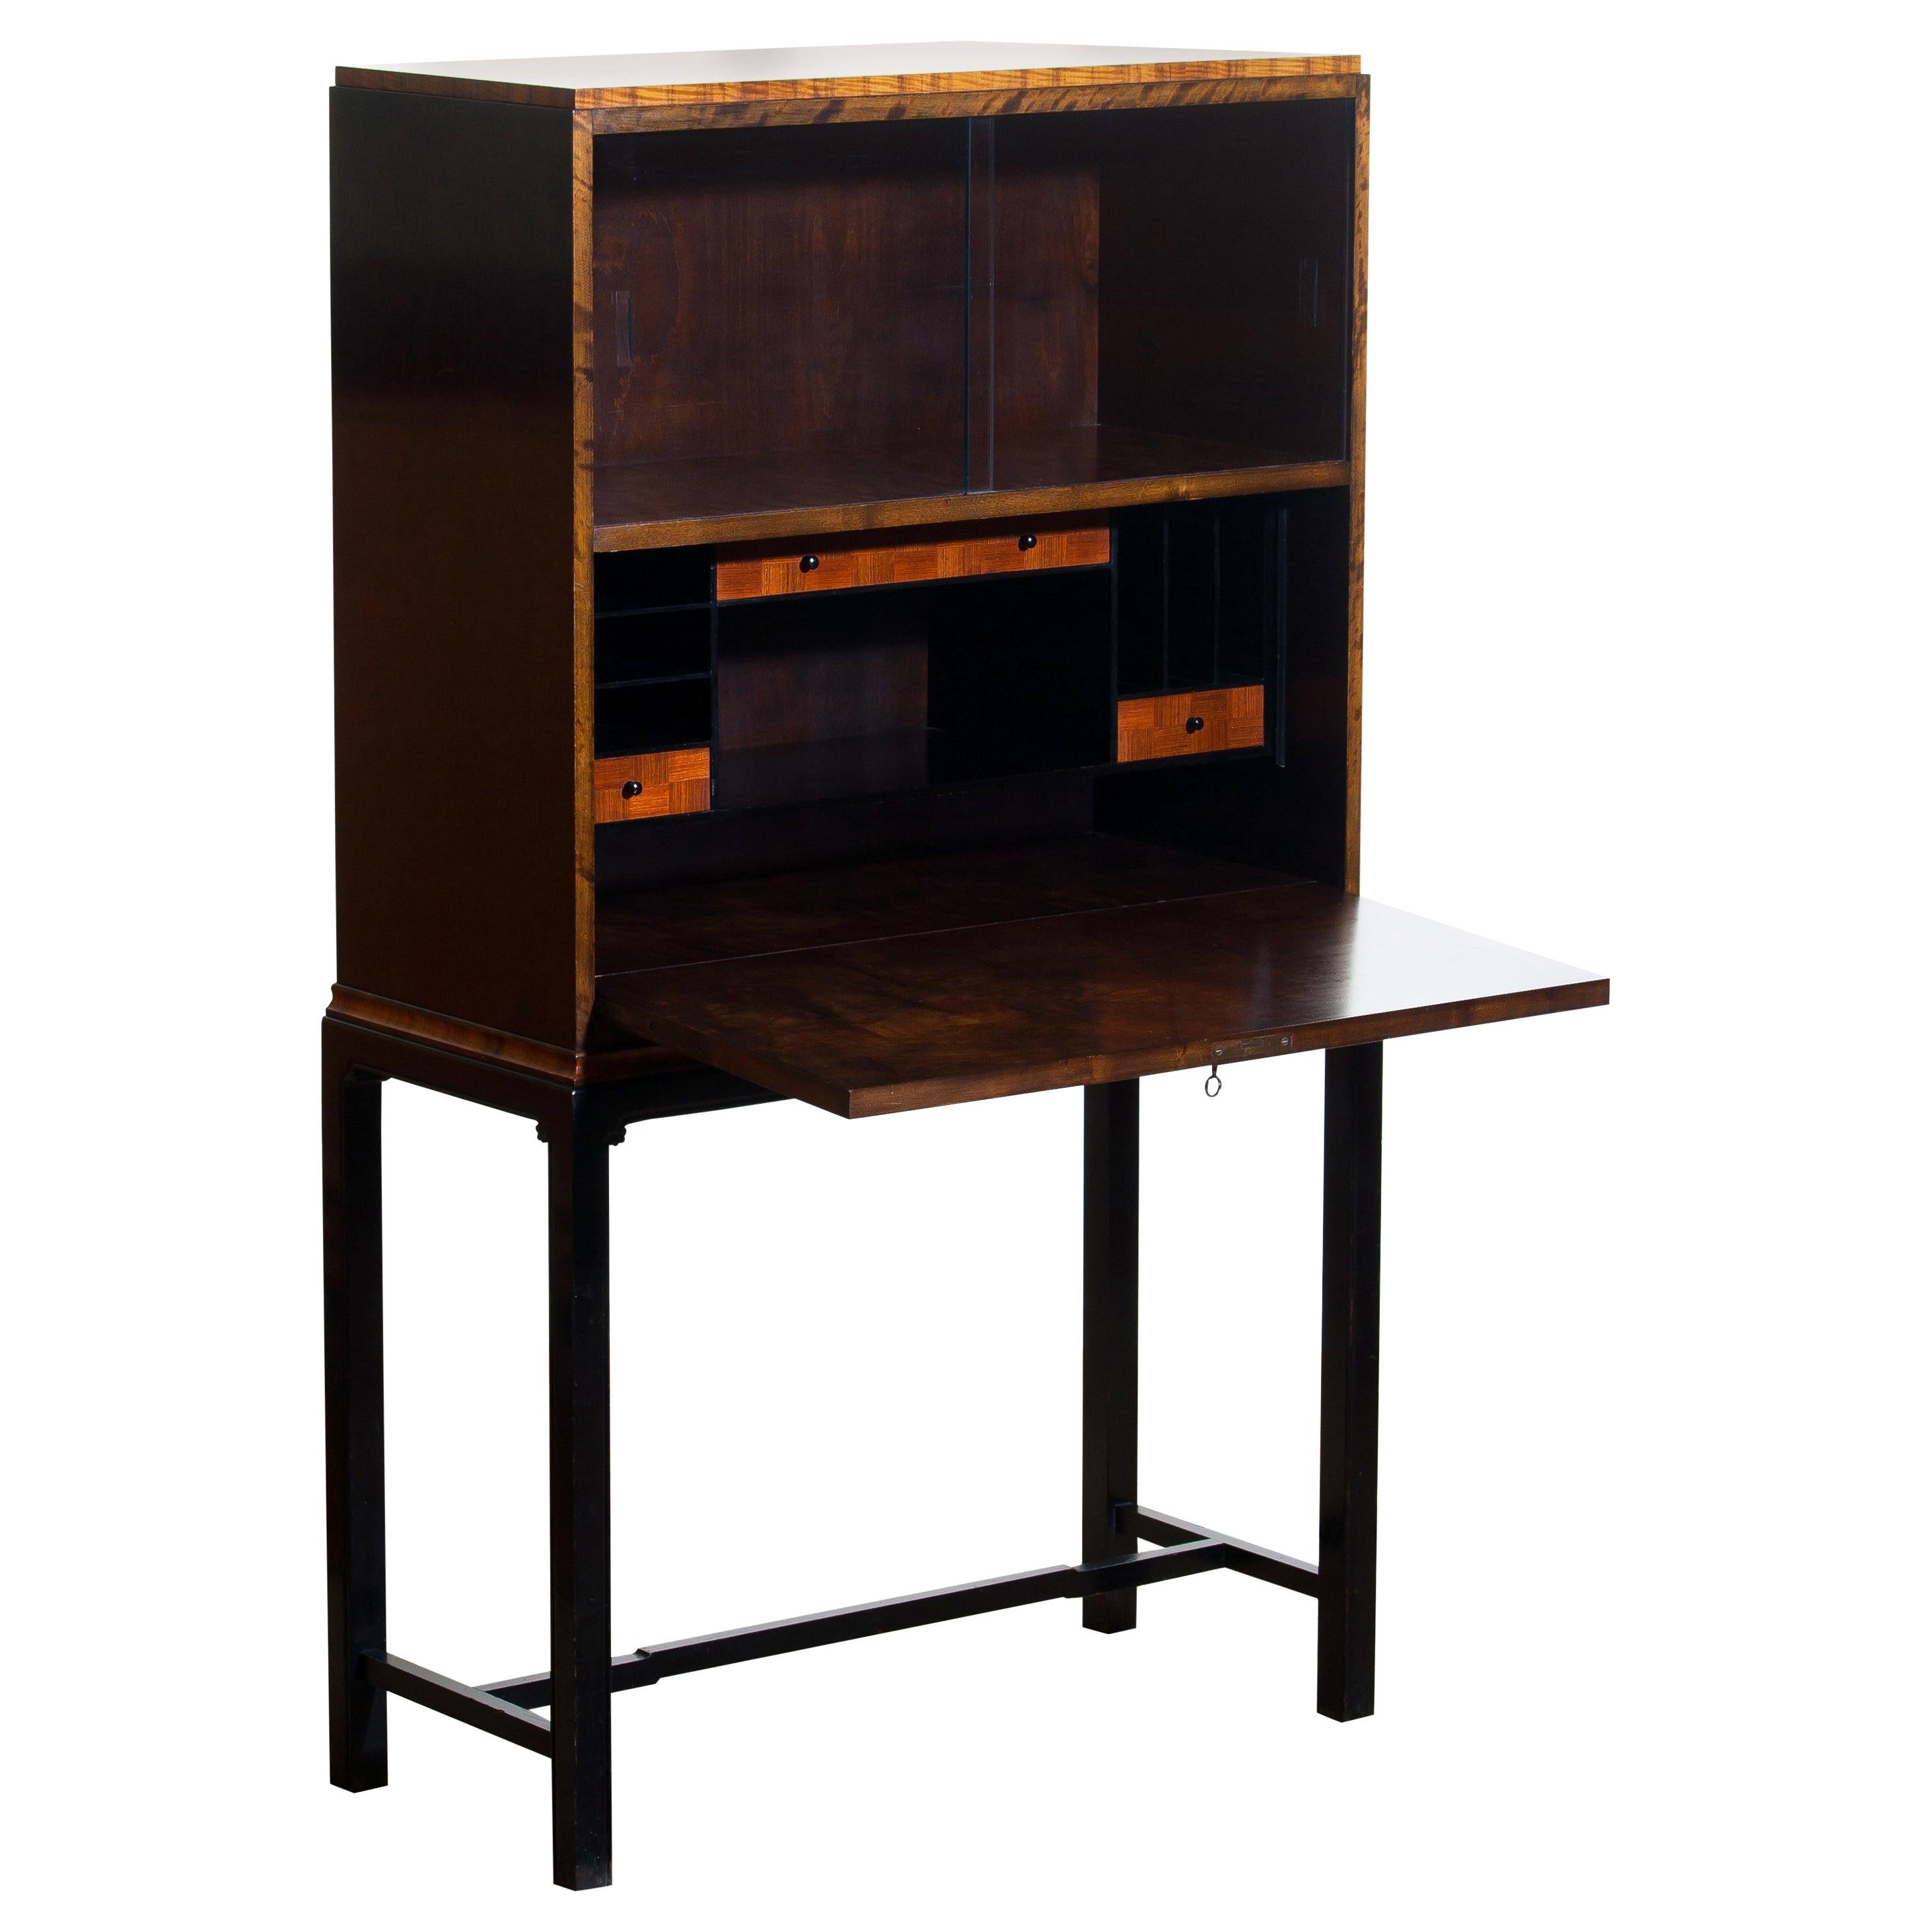 1920s, unique secretaire designed by Axel Einar Hjorth and manufactured in 1924 by Nordiska Kompaniet, numbered L228.
This unique Art Deco secretaire is designed as an come-in to the USA for Nordiska Kompaniet.

The secretaire is veneered with